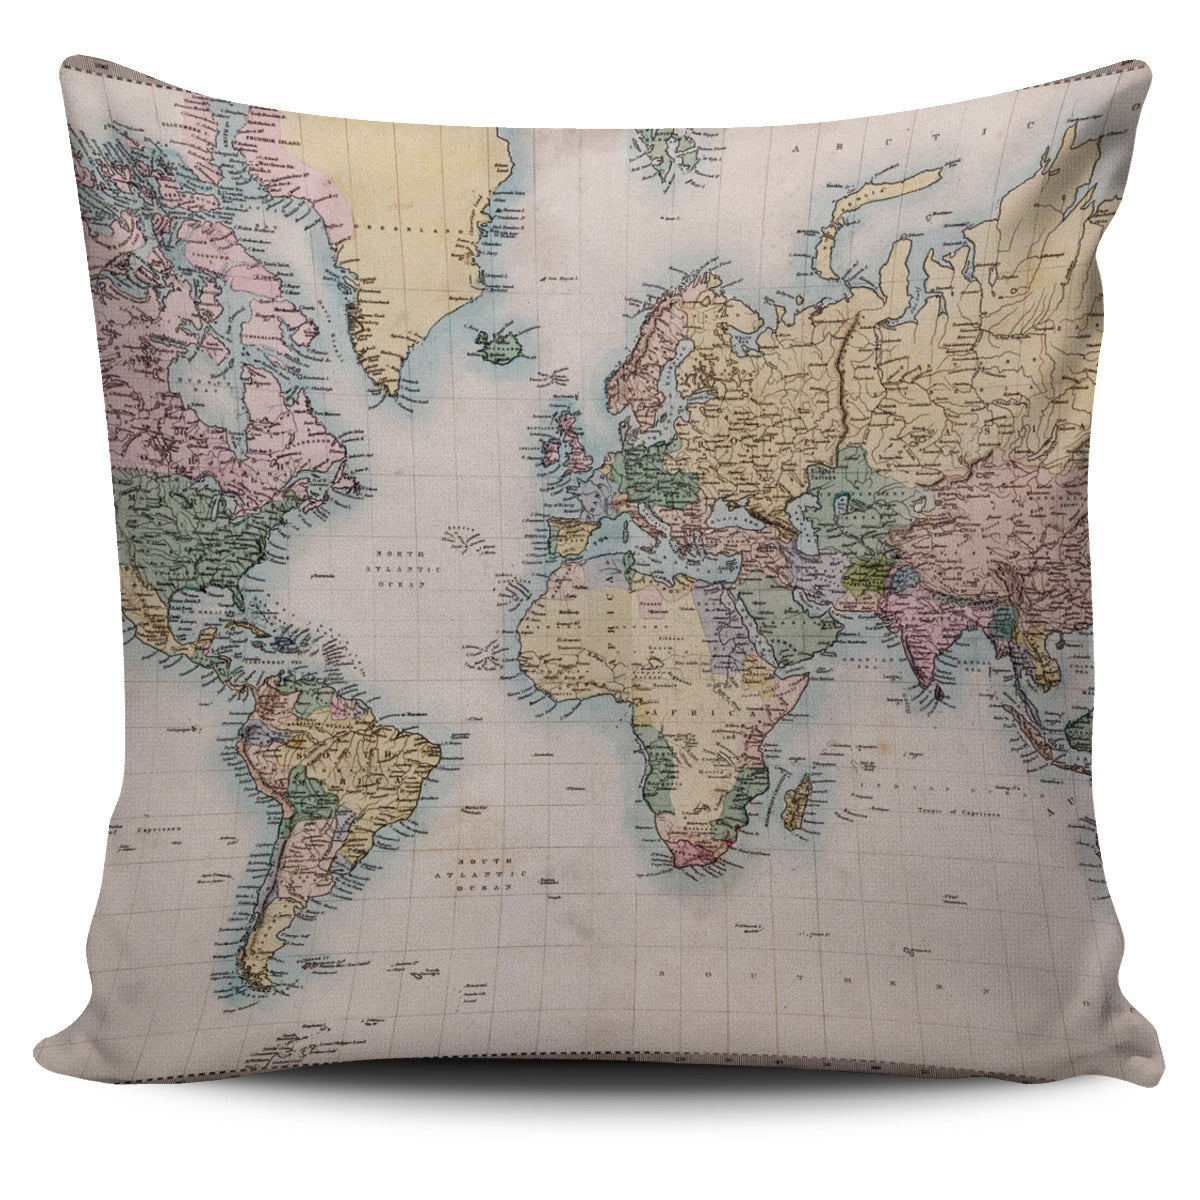 Vintage Geography Map Pillow Cover